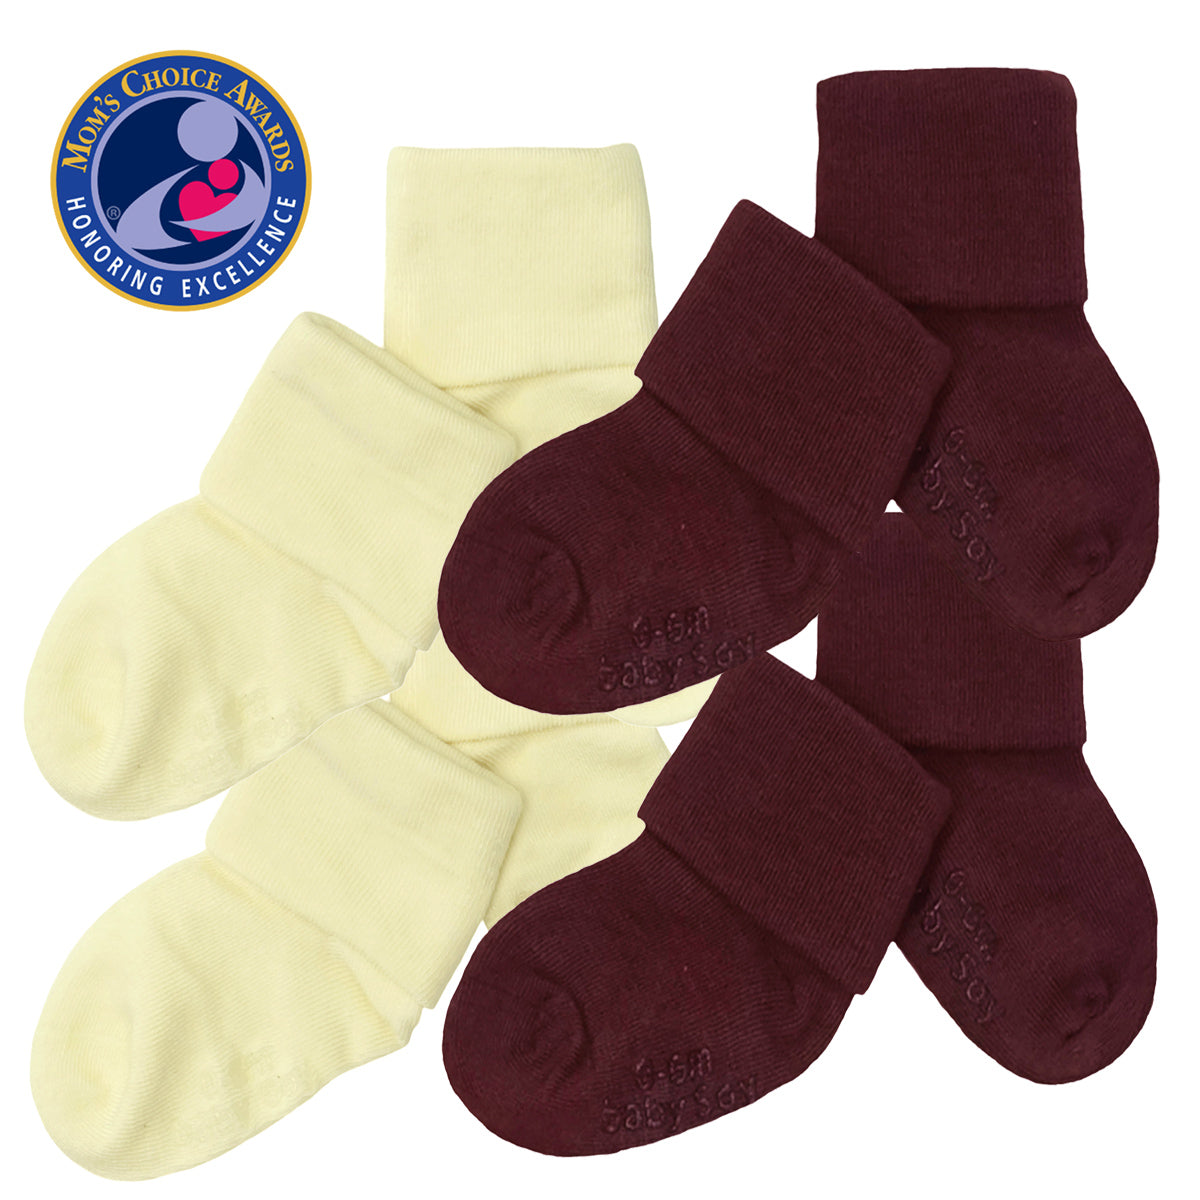 Babysoy Baby Socks Solid Colors That Stay-On with Grips Berry / 12-24 Months